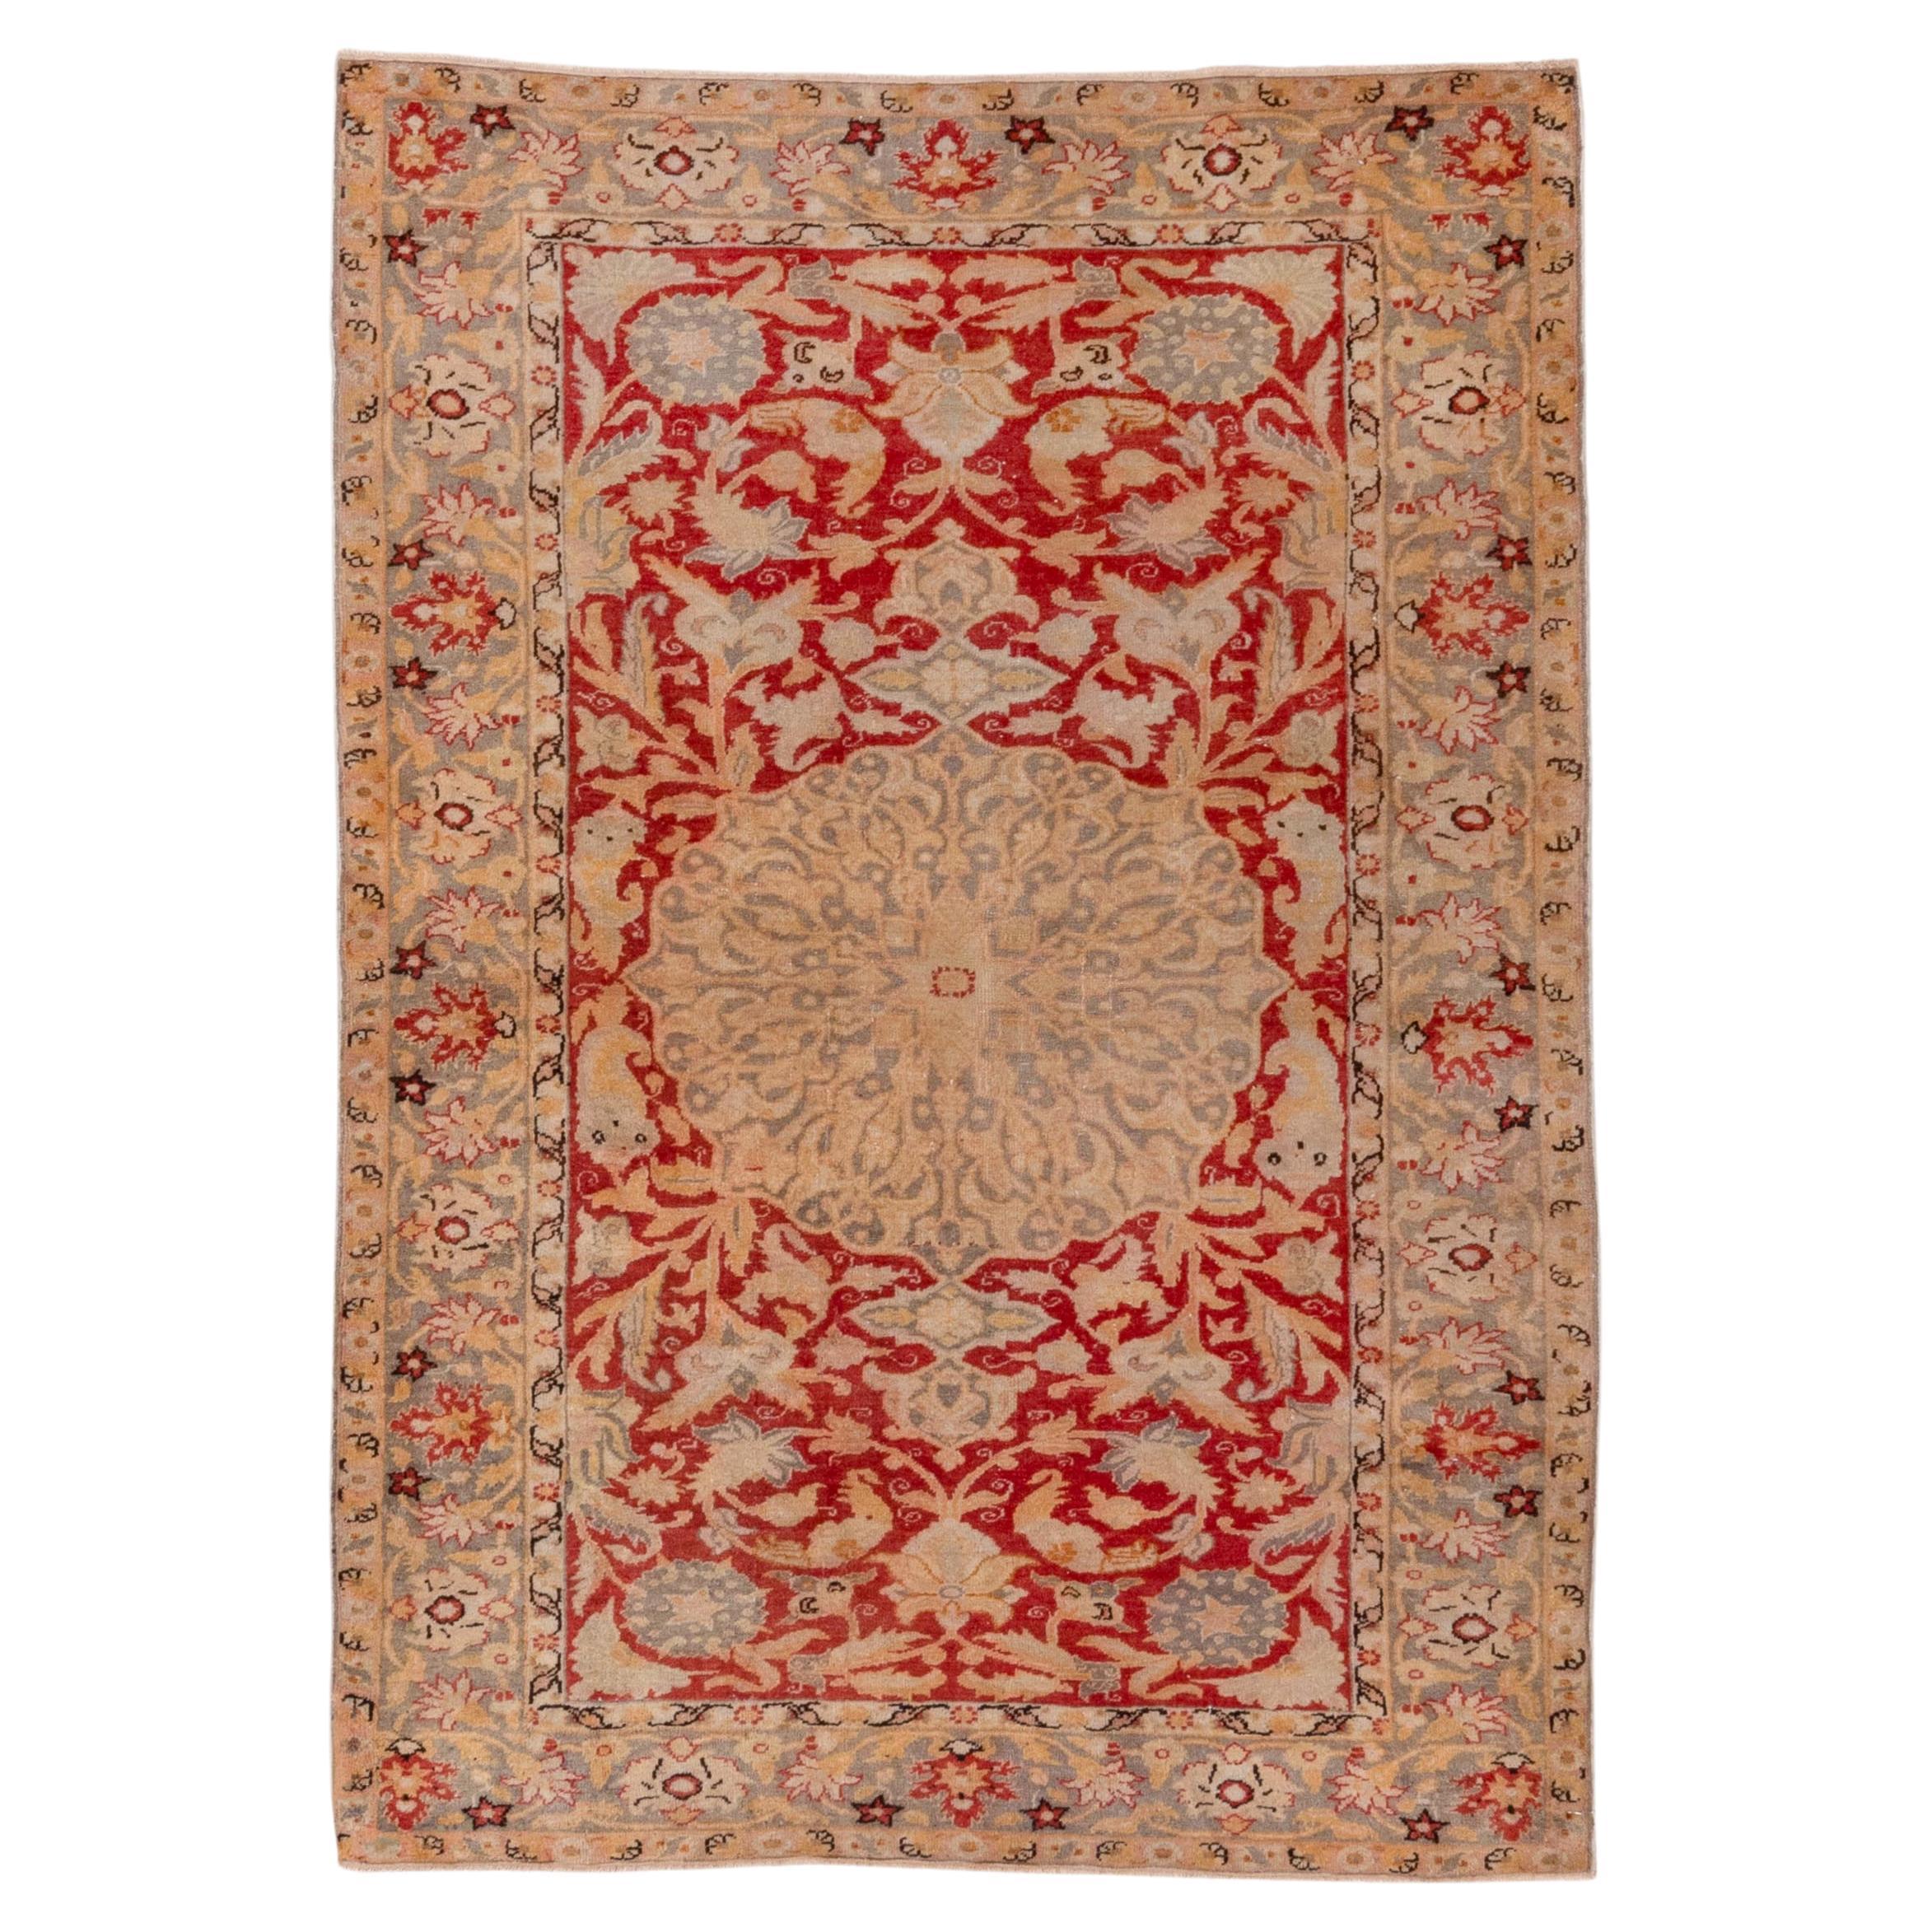 Royal Red and Egyptian Sand Tan, Center Medallion 1930s Antique Kaisary Rug For Sale